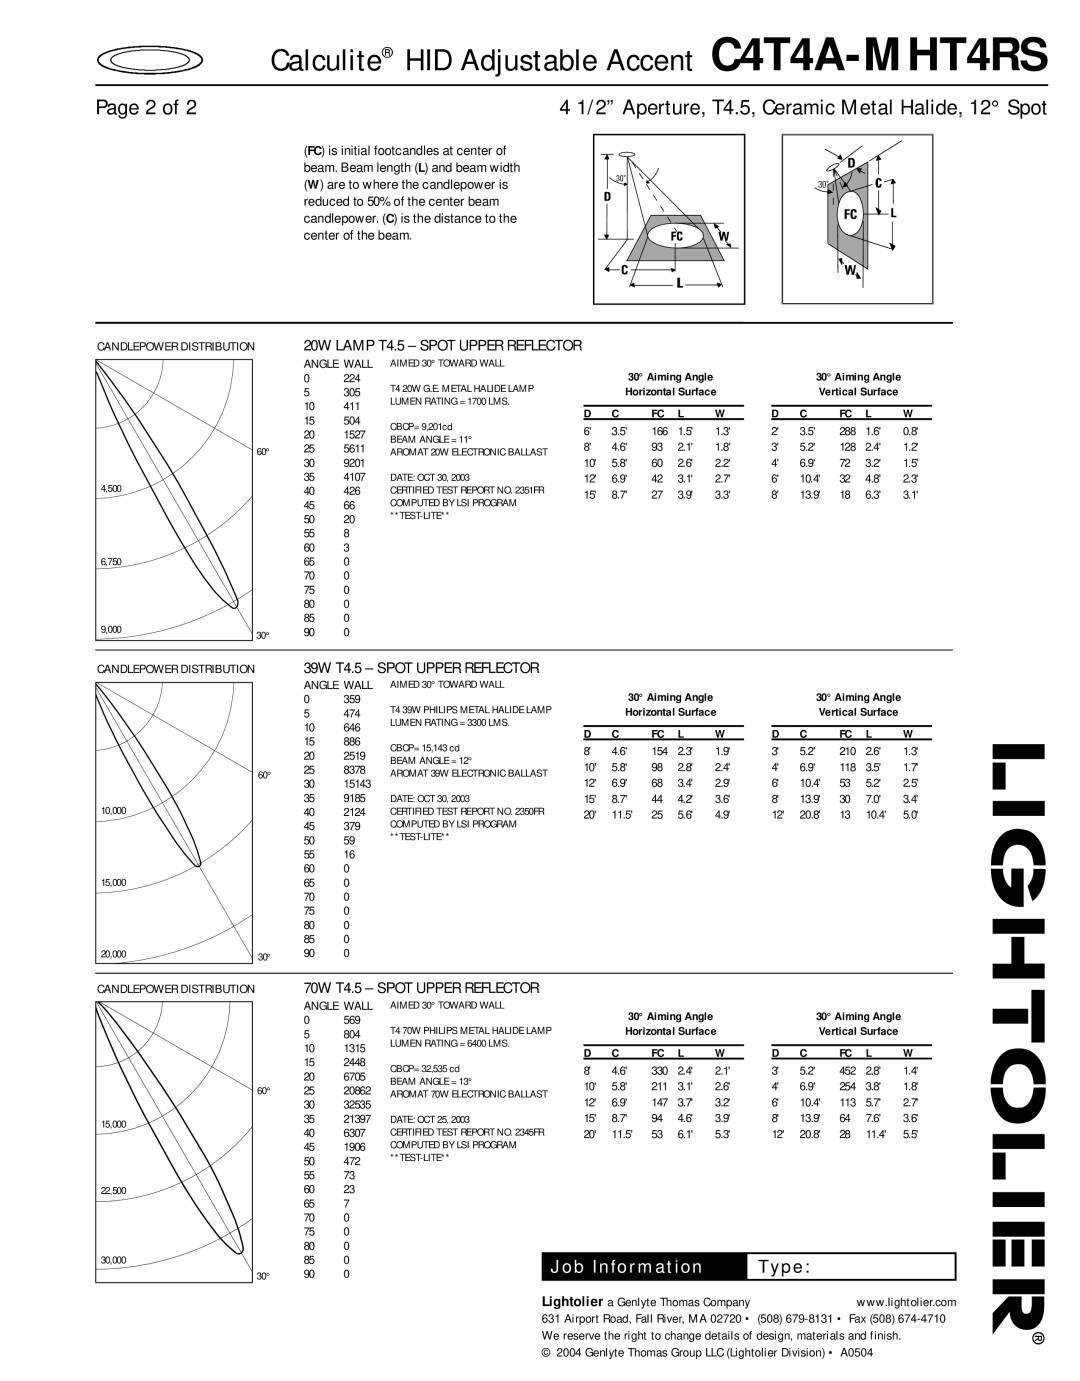 Lightolier manual Calculite HID Adjustable Accent C4T4A-MHT4RS, Page 2 of, Job Information, Type 